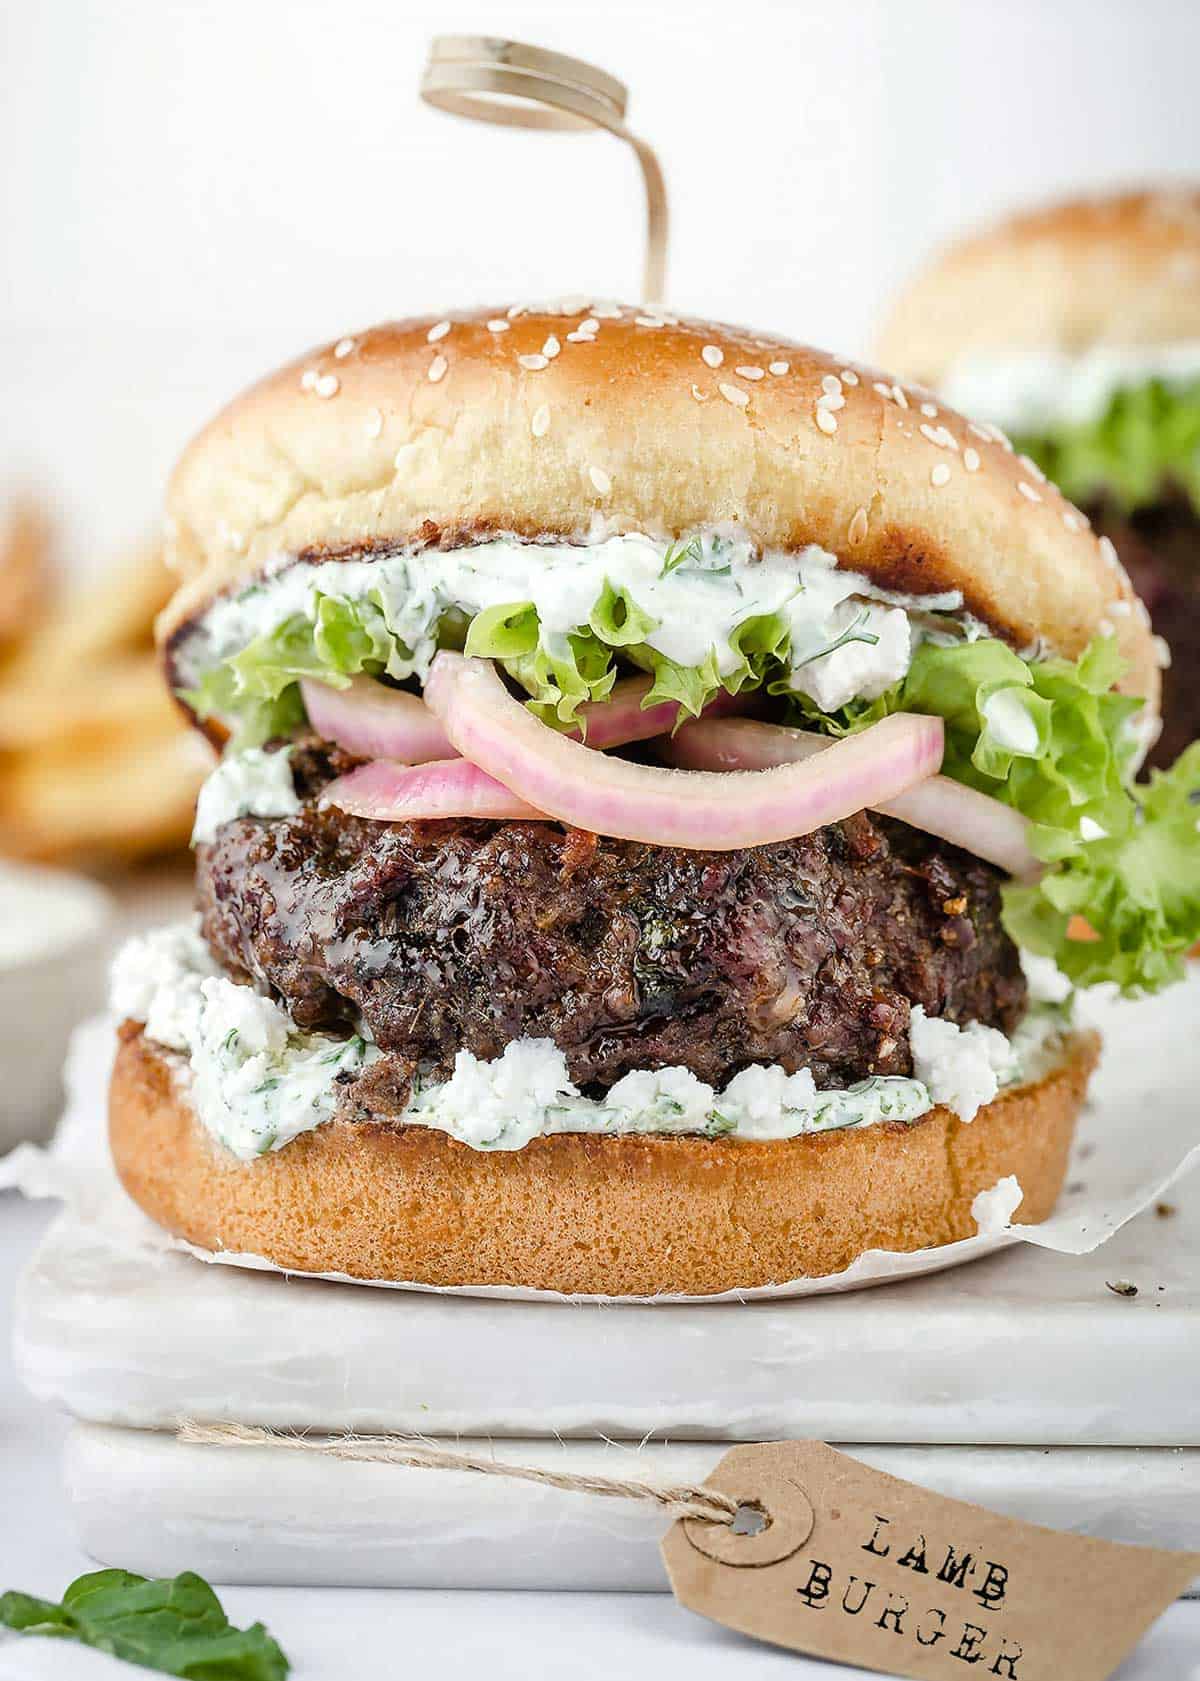 Juicy lamb burger on a bun with tzatziki, feta, lettuce, and pickled red onions.